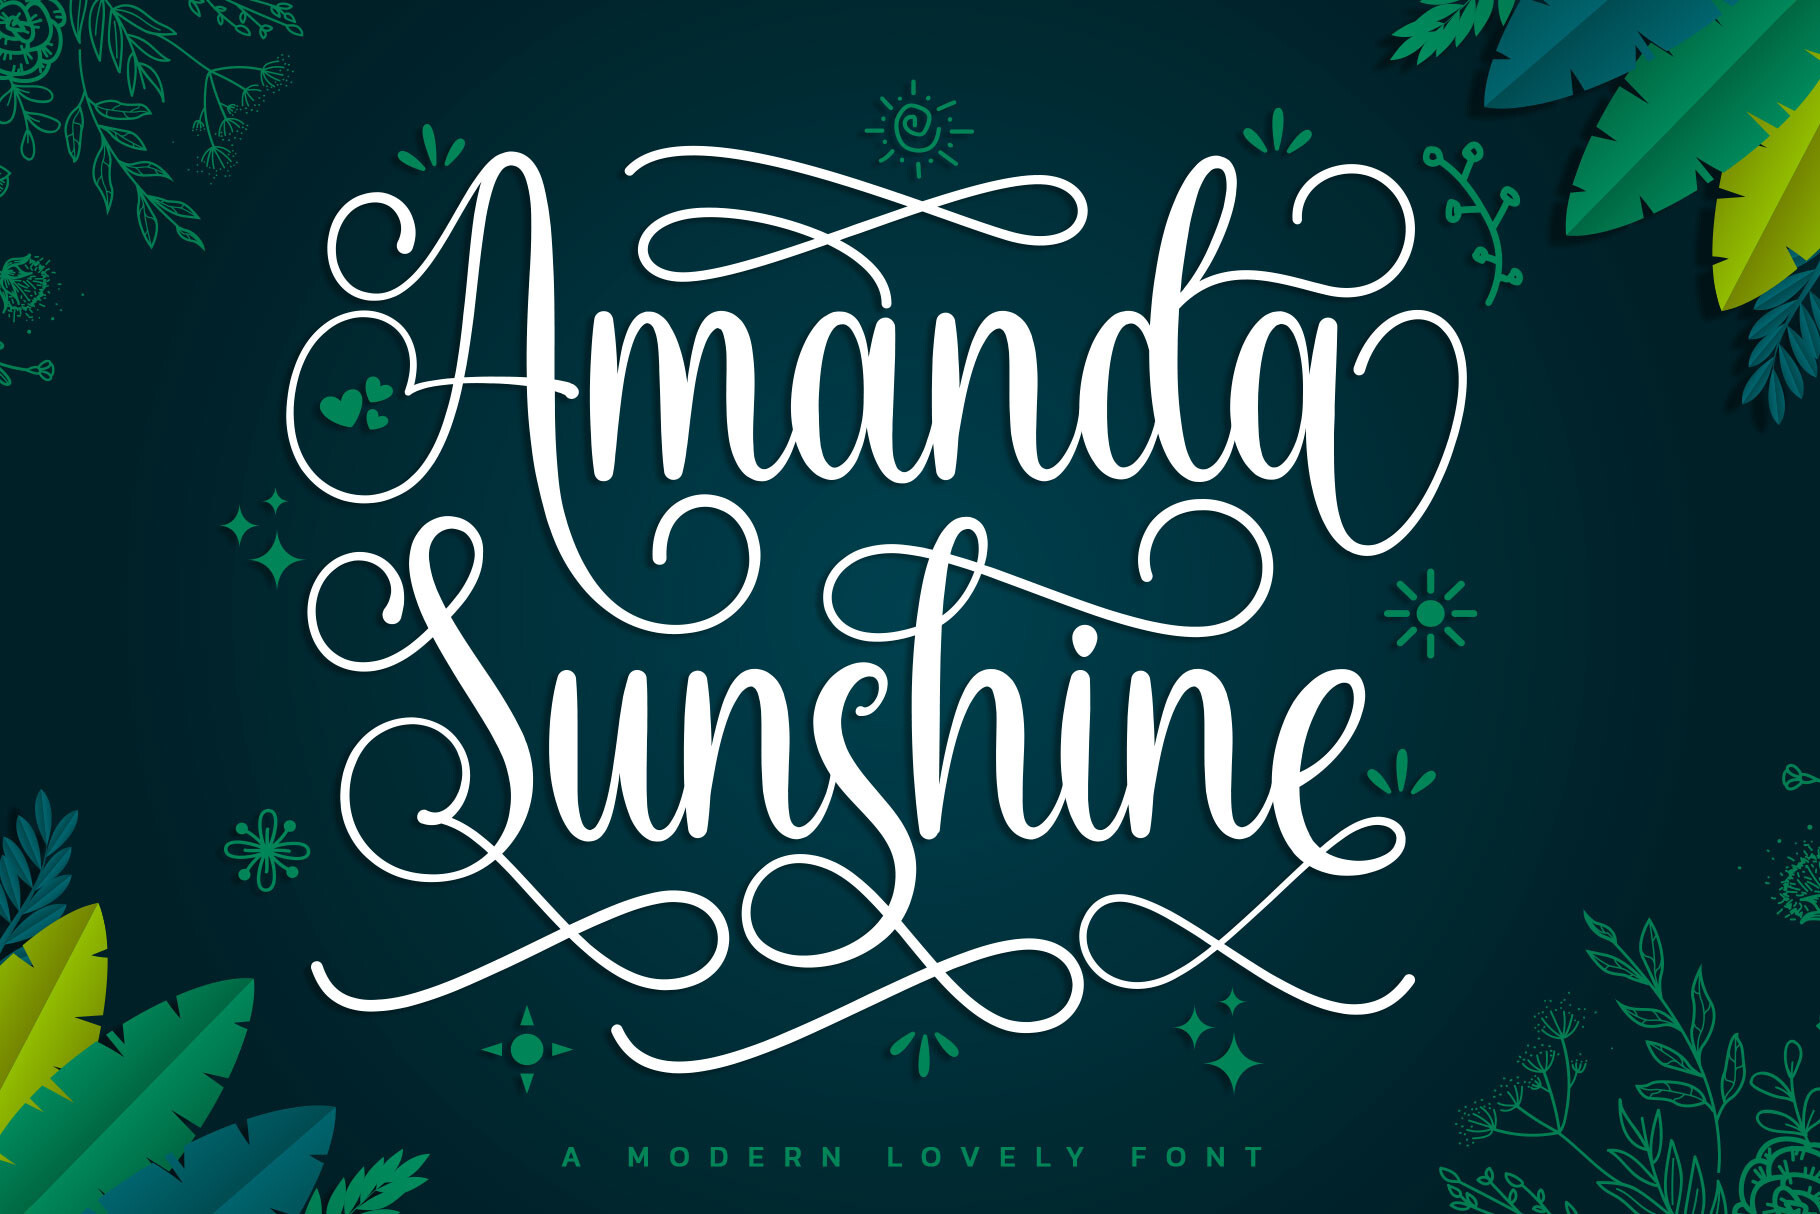 Preview and download Amanda Sunshine font